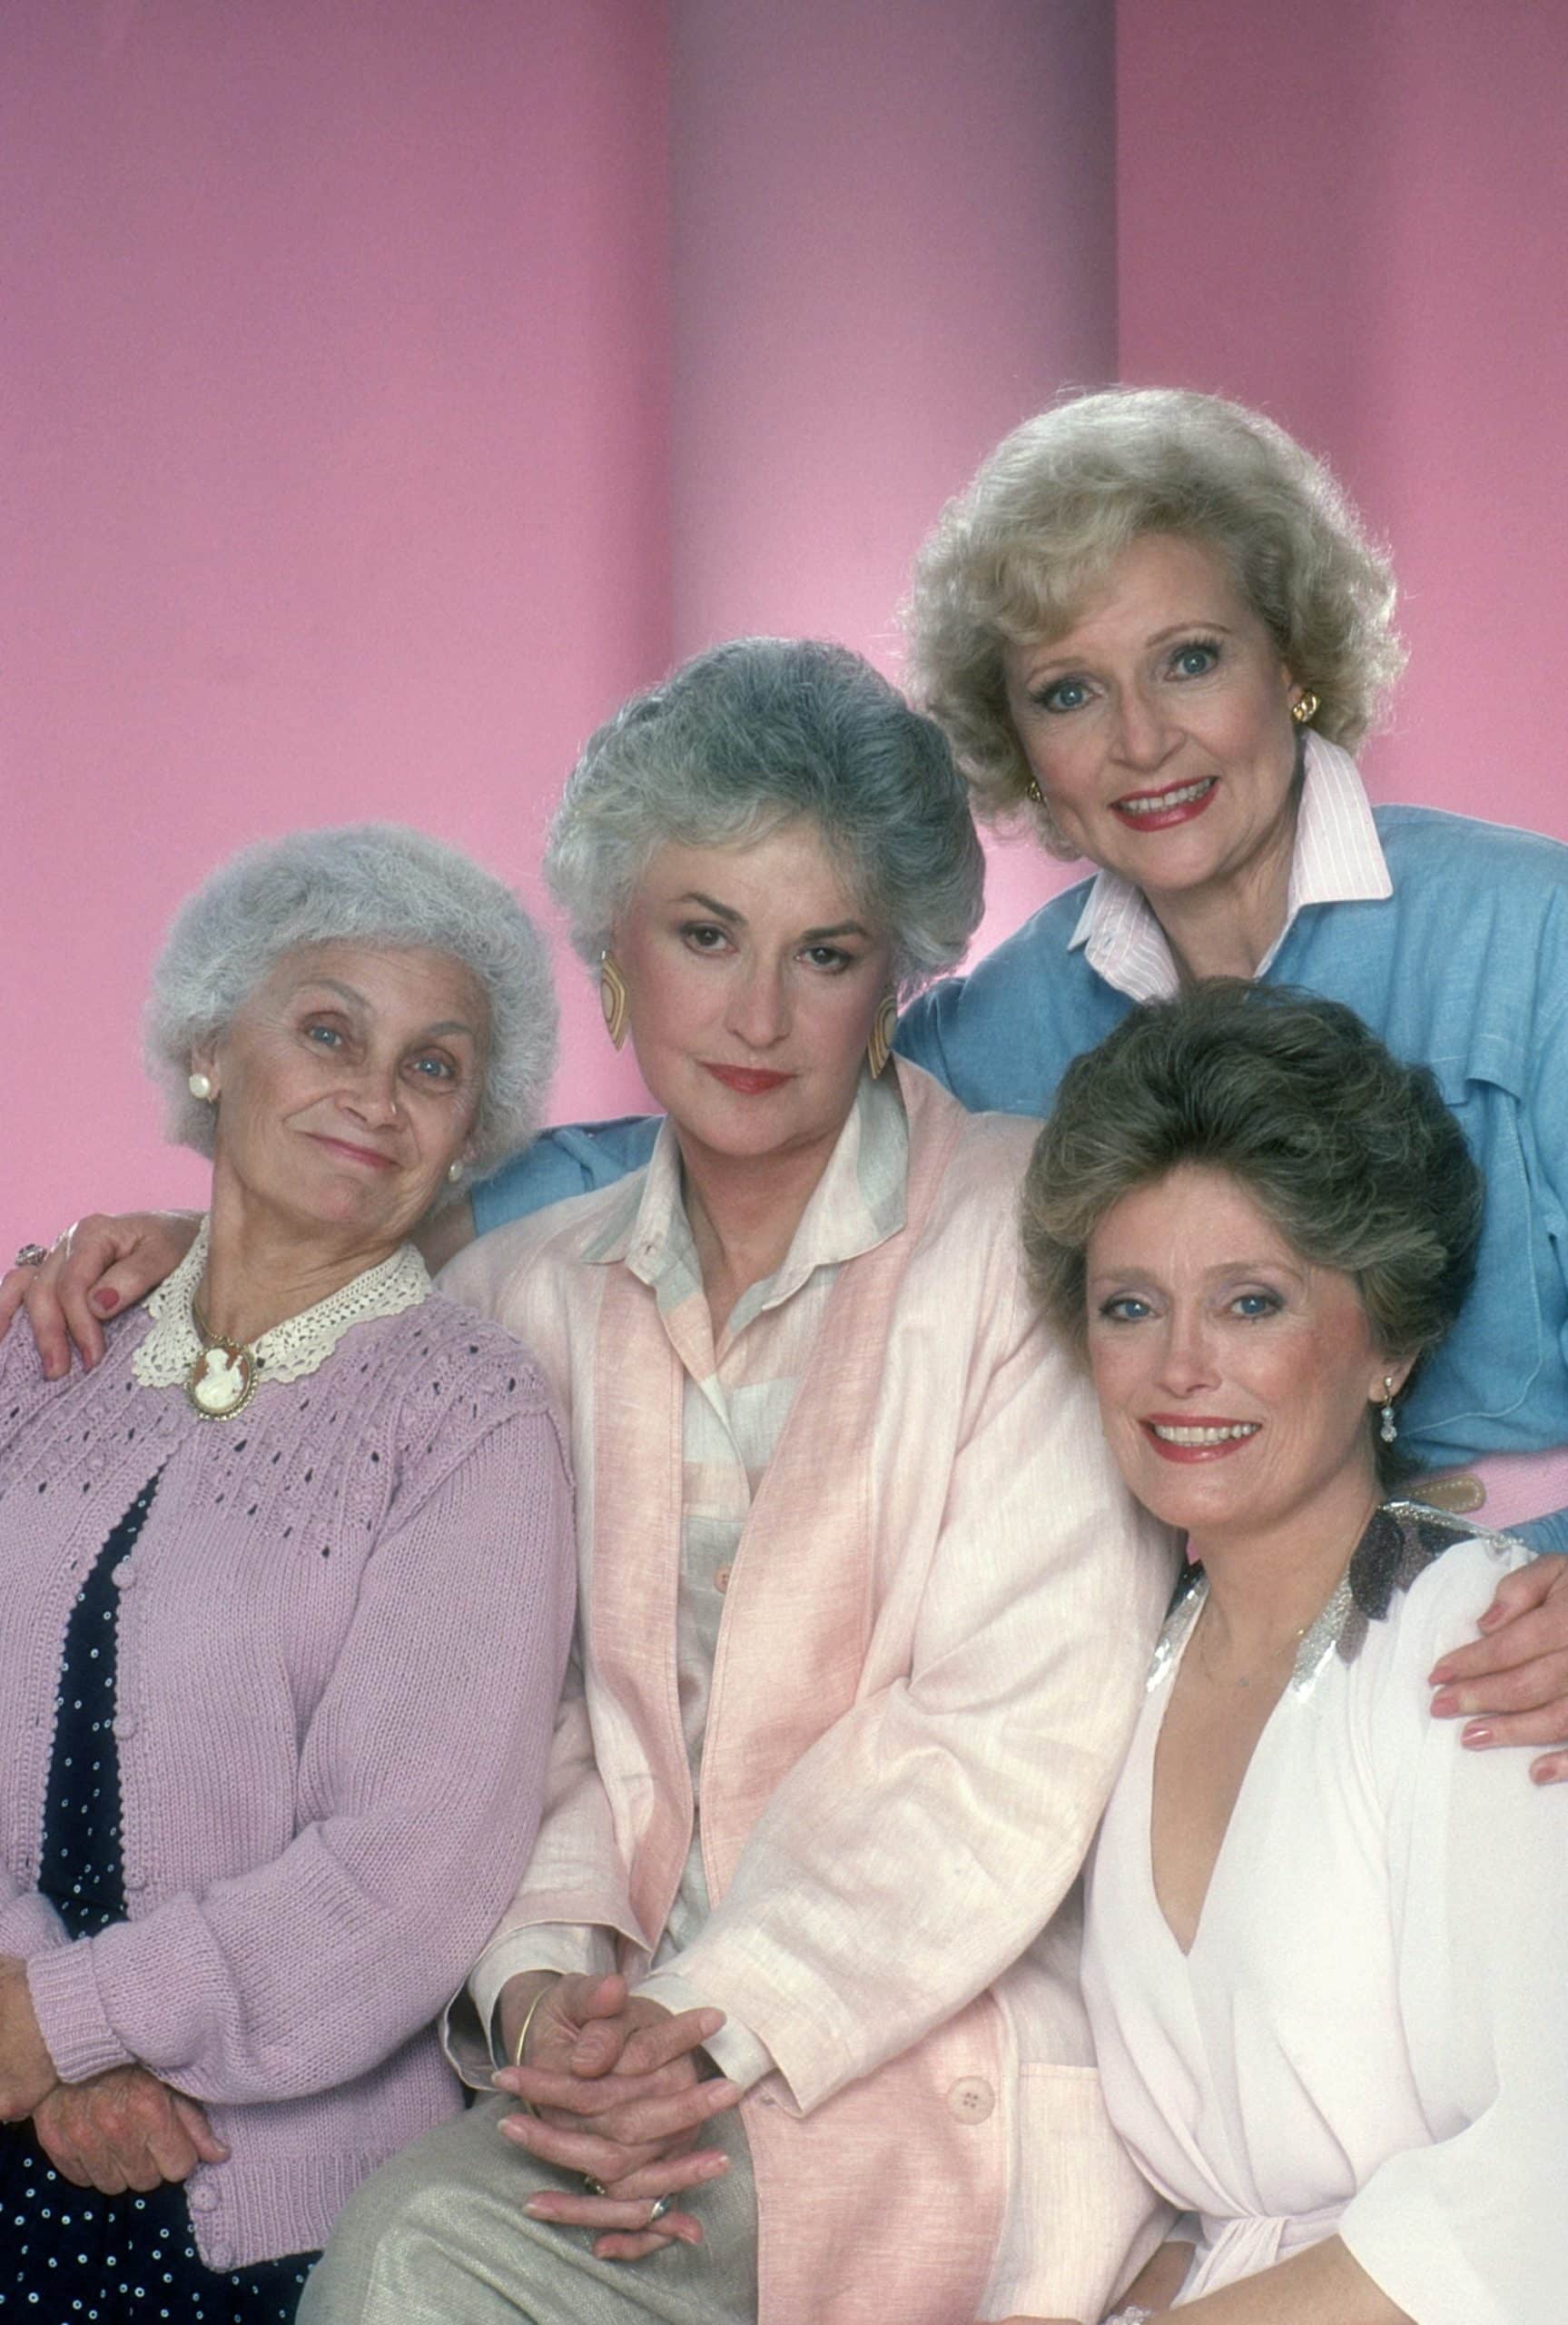 THE GOLDEN GIRLS, from left, Estelle Getty, Bea Arthur, Rue McClanahan (front), Betty White, 1985-92 (1985 photo)